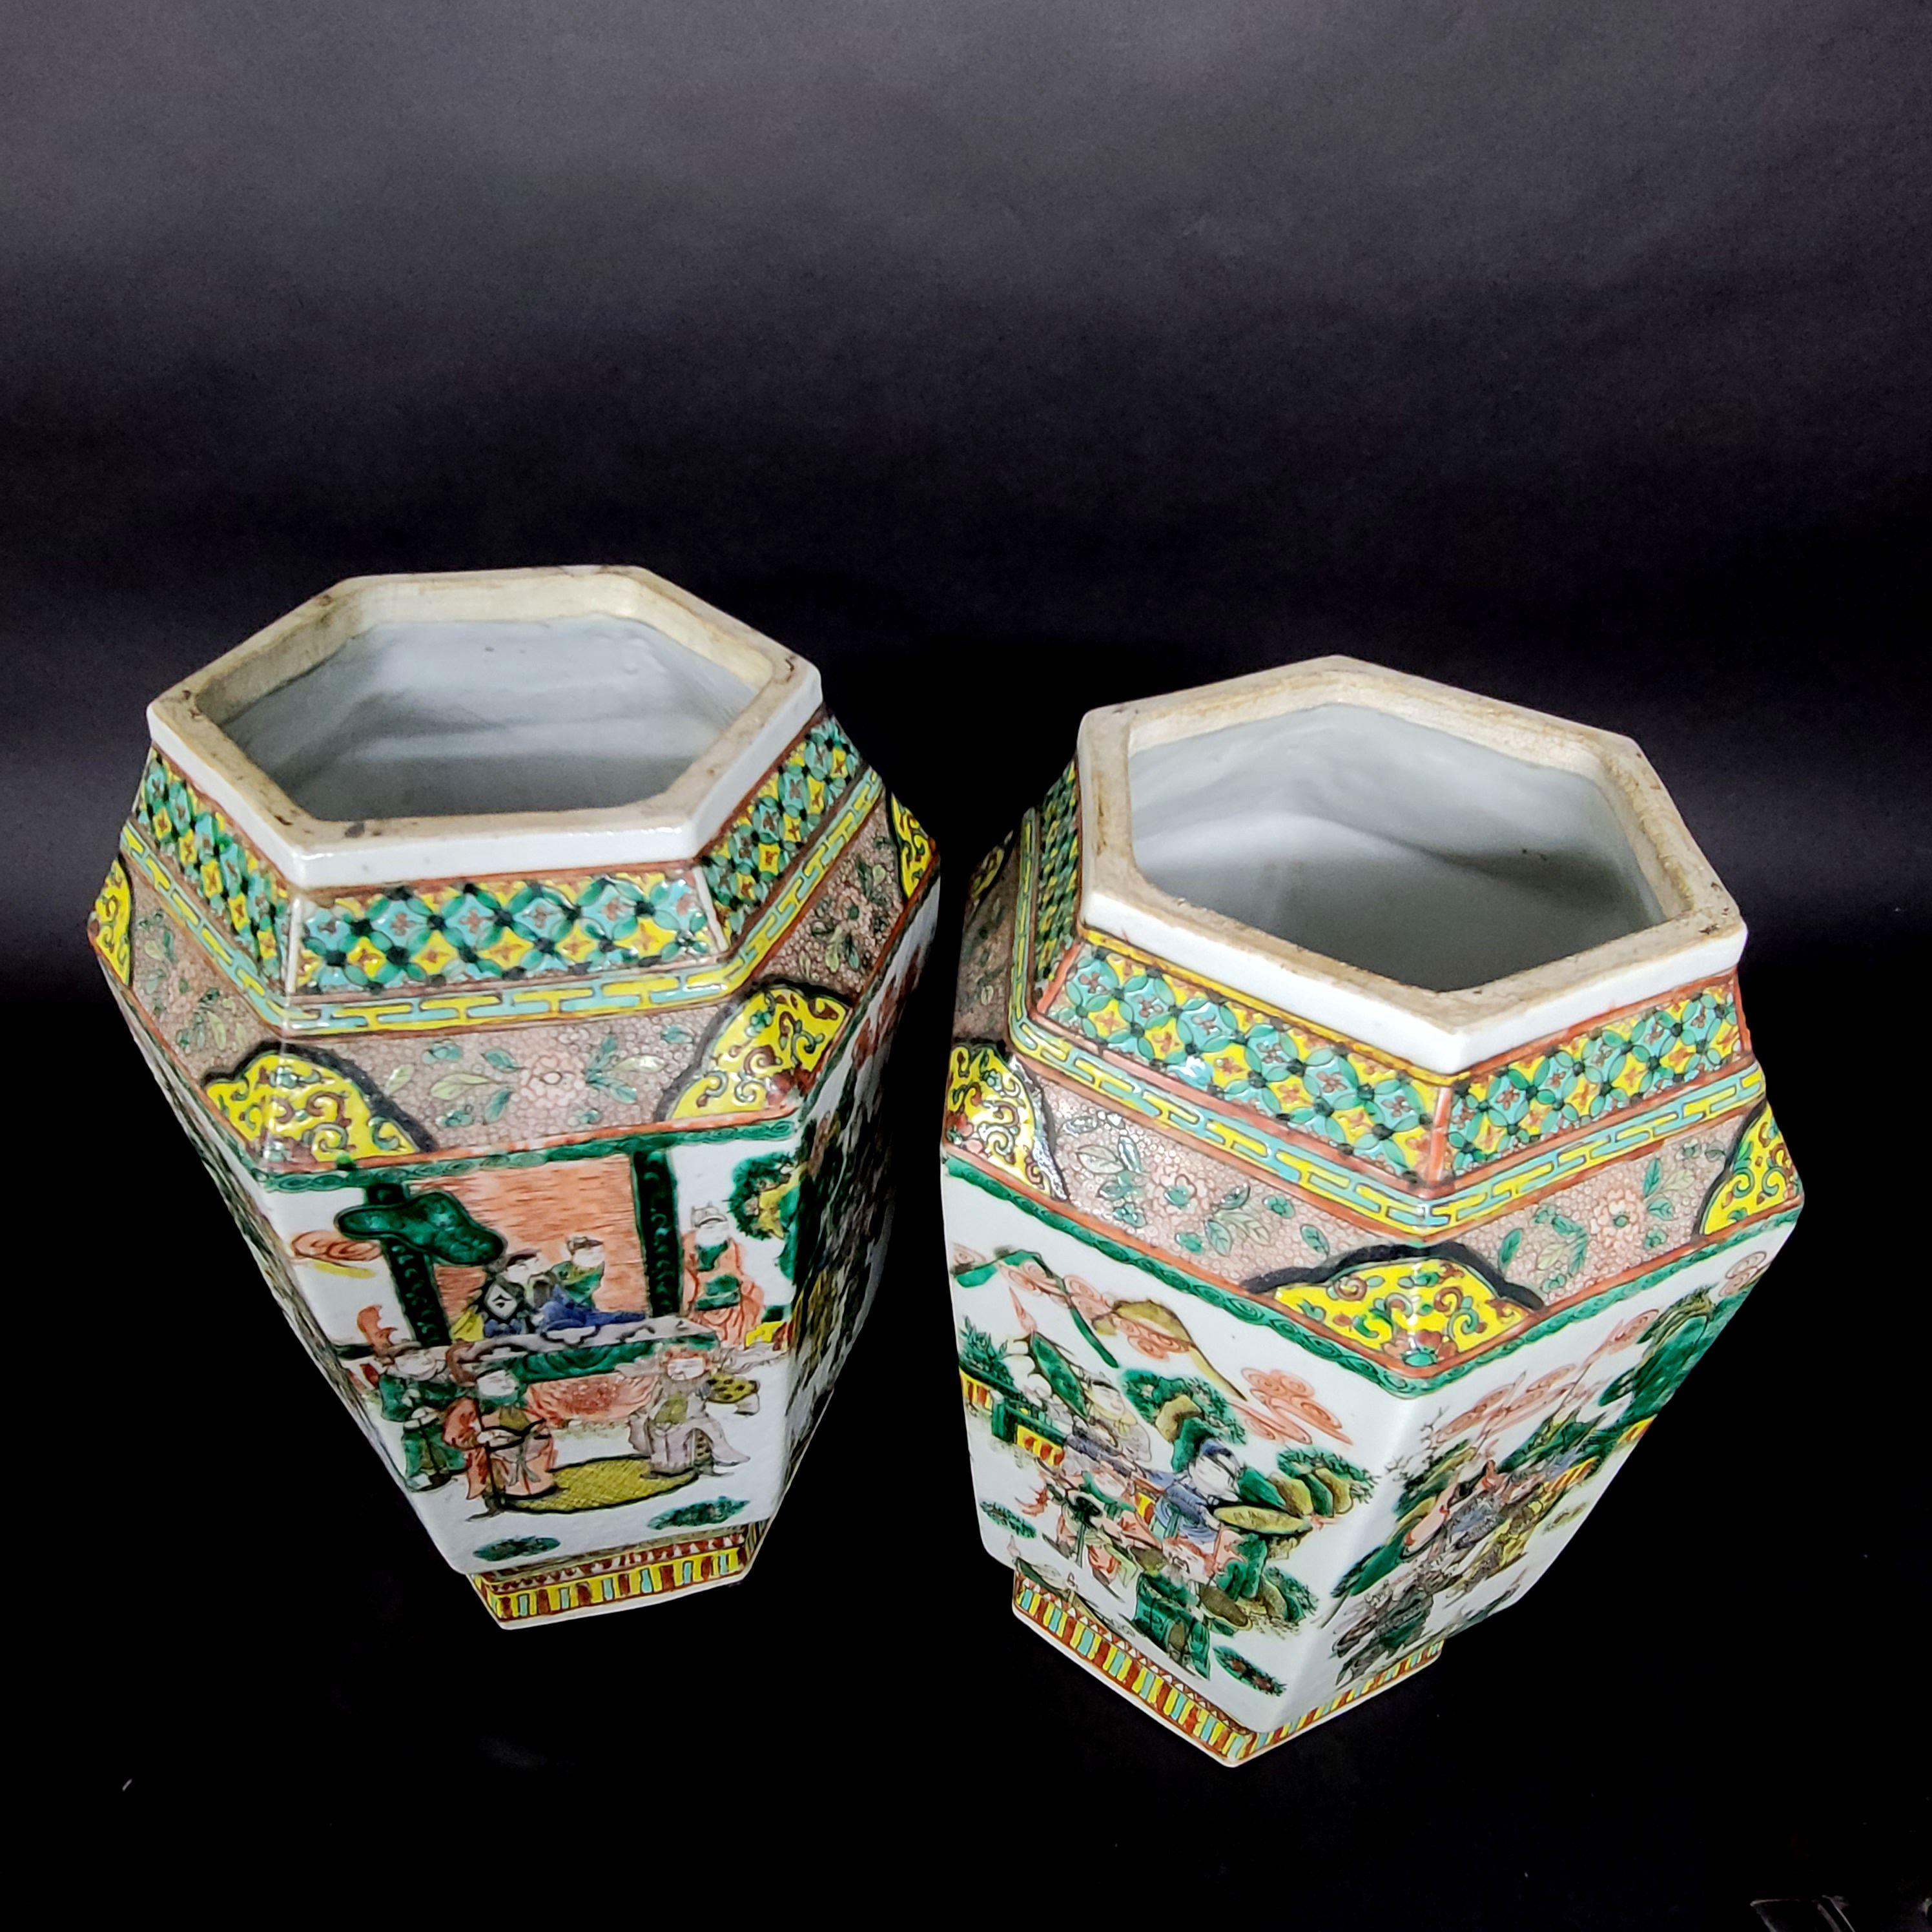 Matching Pair of Chinese Hexagonal Porcelain Vases, 19th Century For Sale 4